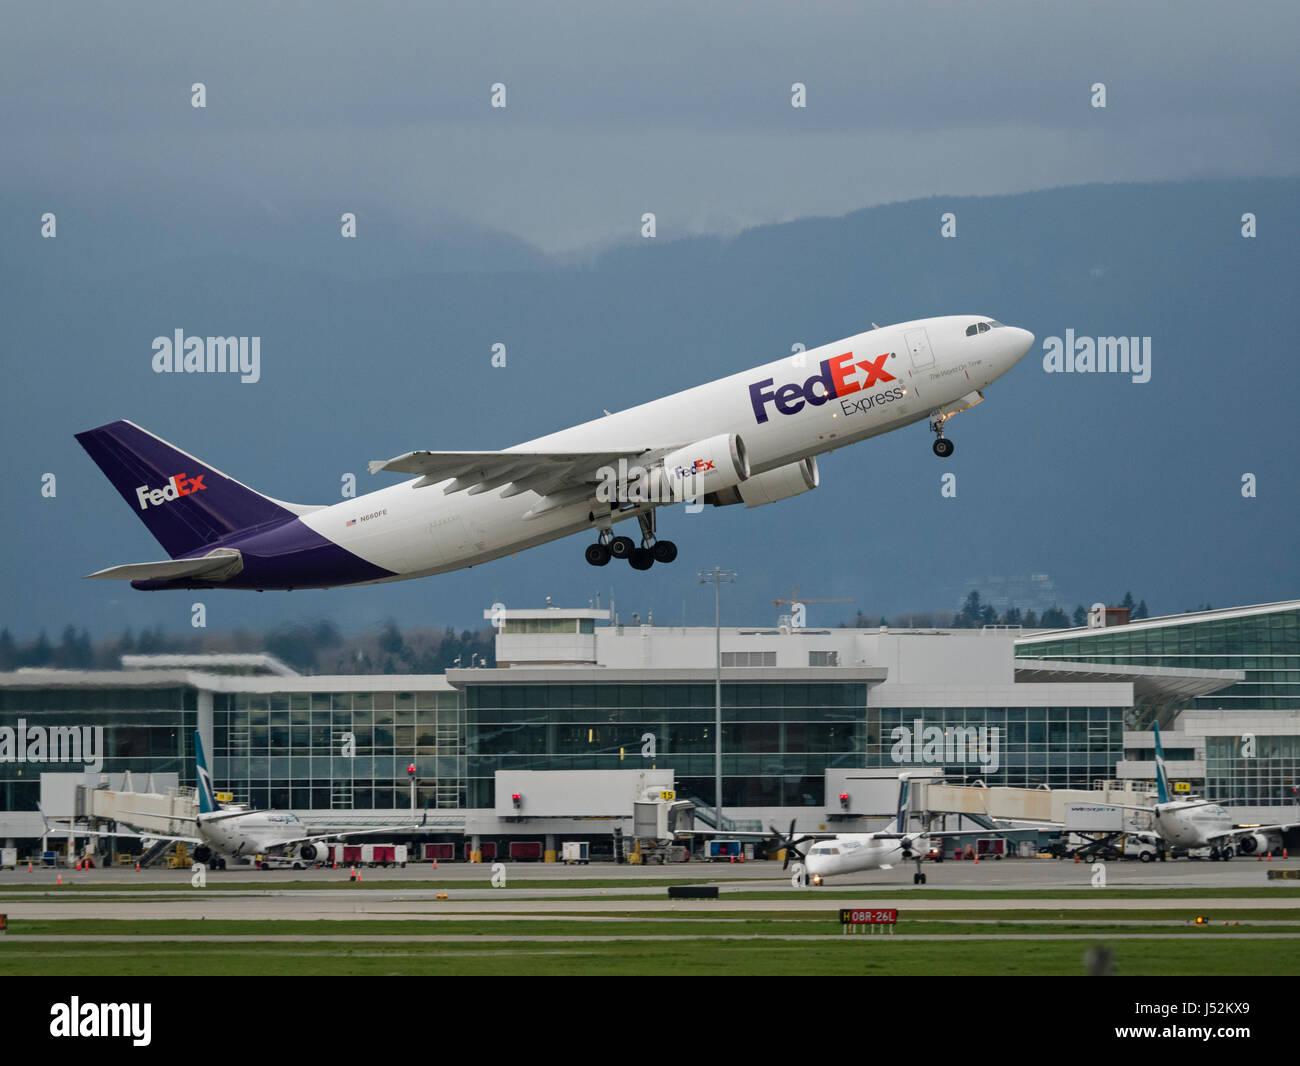 FedEx Express cargo airline plane airplane aeroplane Airbus A300-600 take taking off Vancouver International Airport airborne Stock Photo